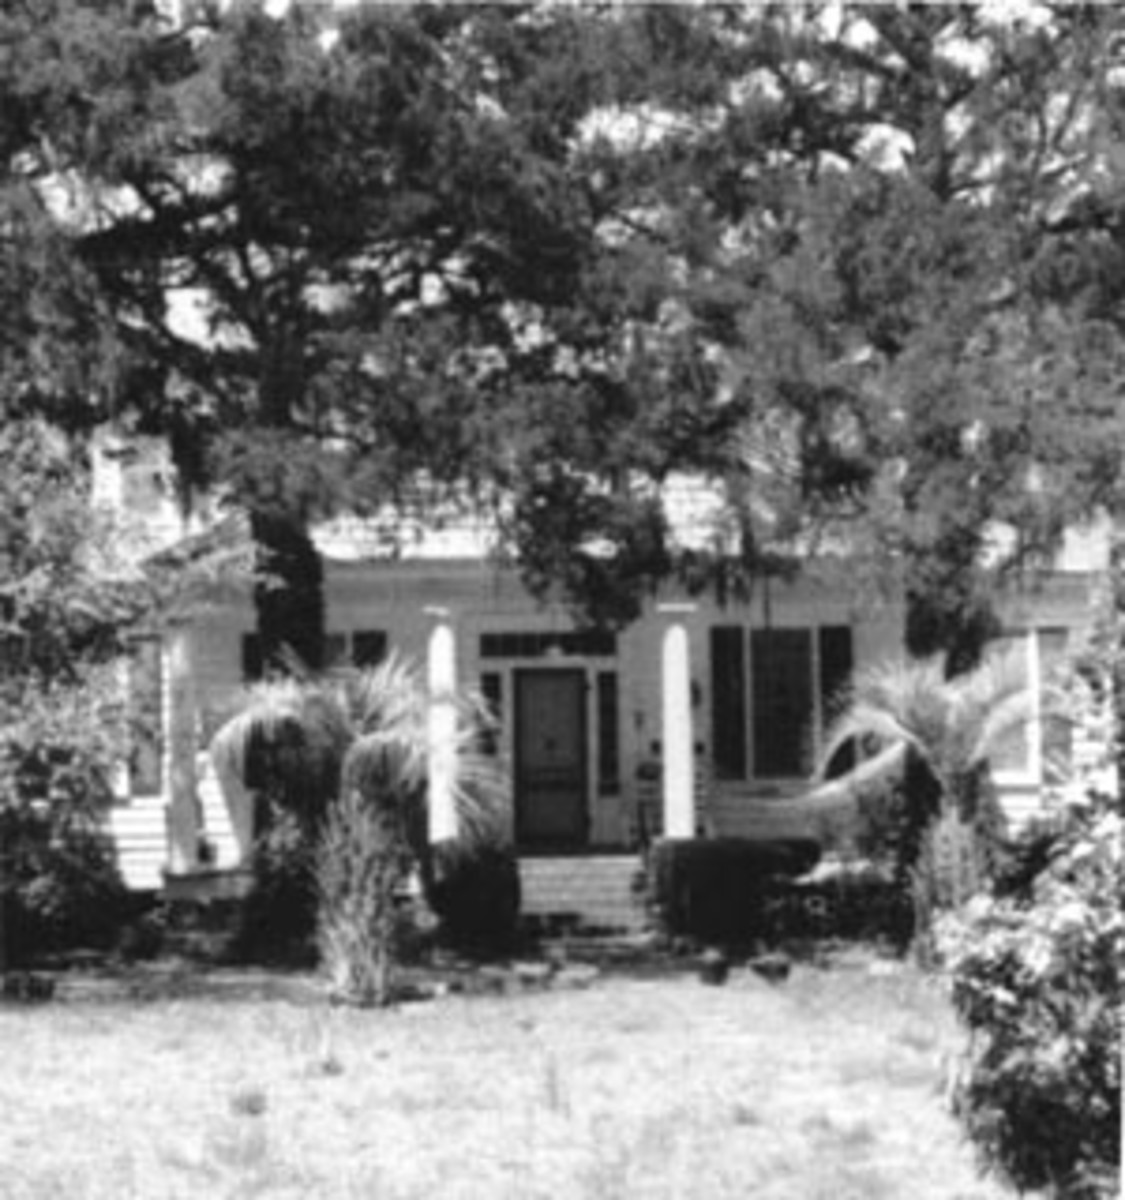 Alice Flagg's home